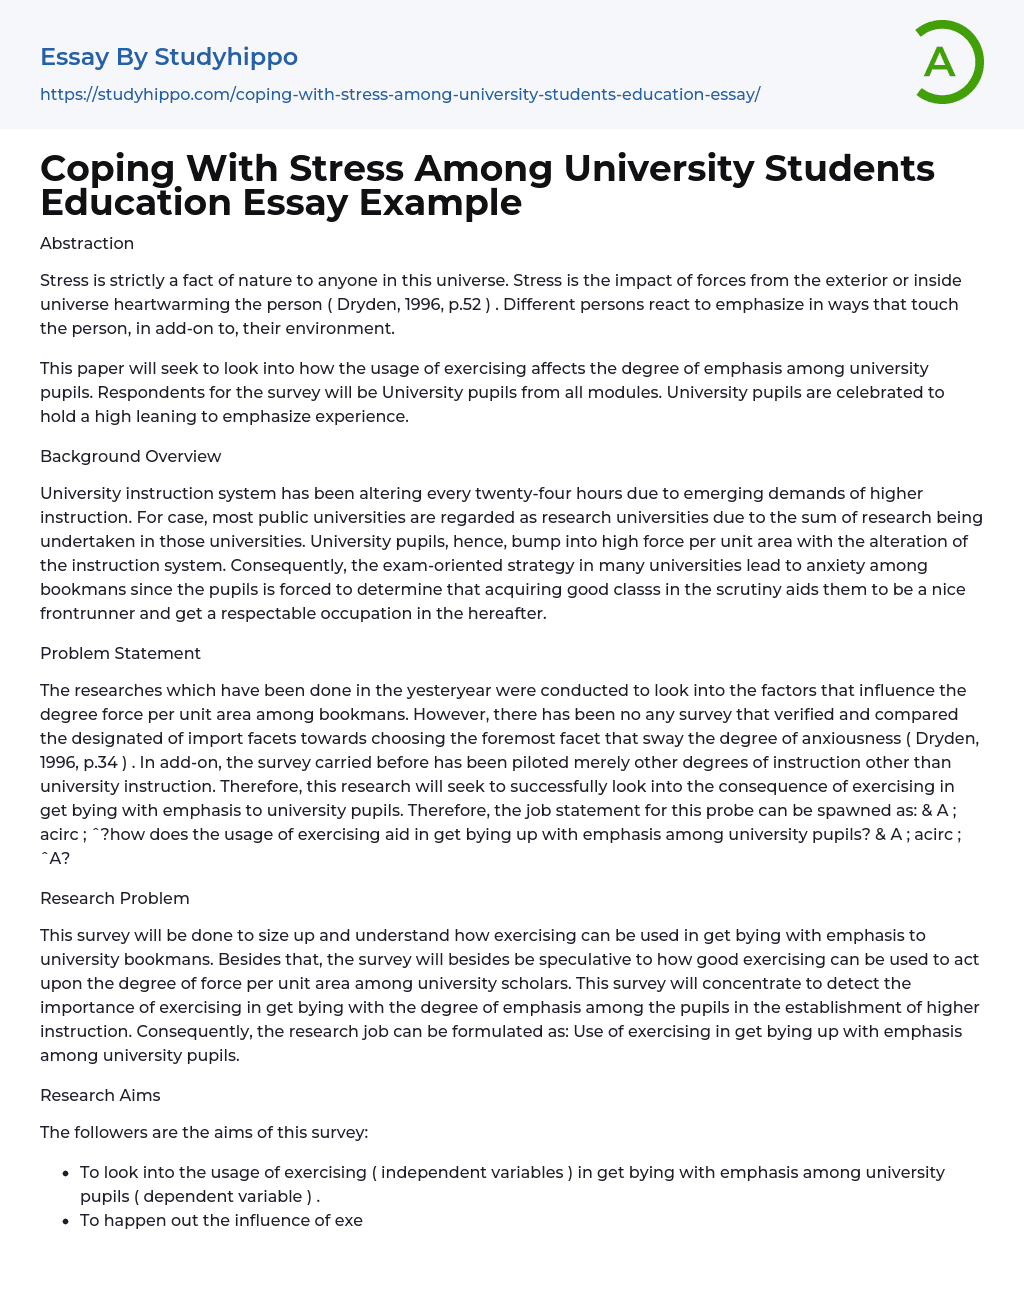 causes of stress among university students essay